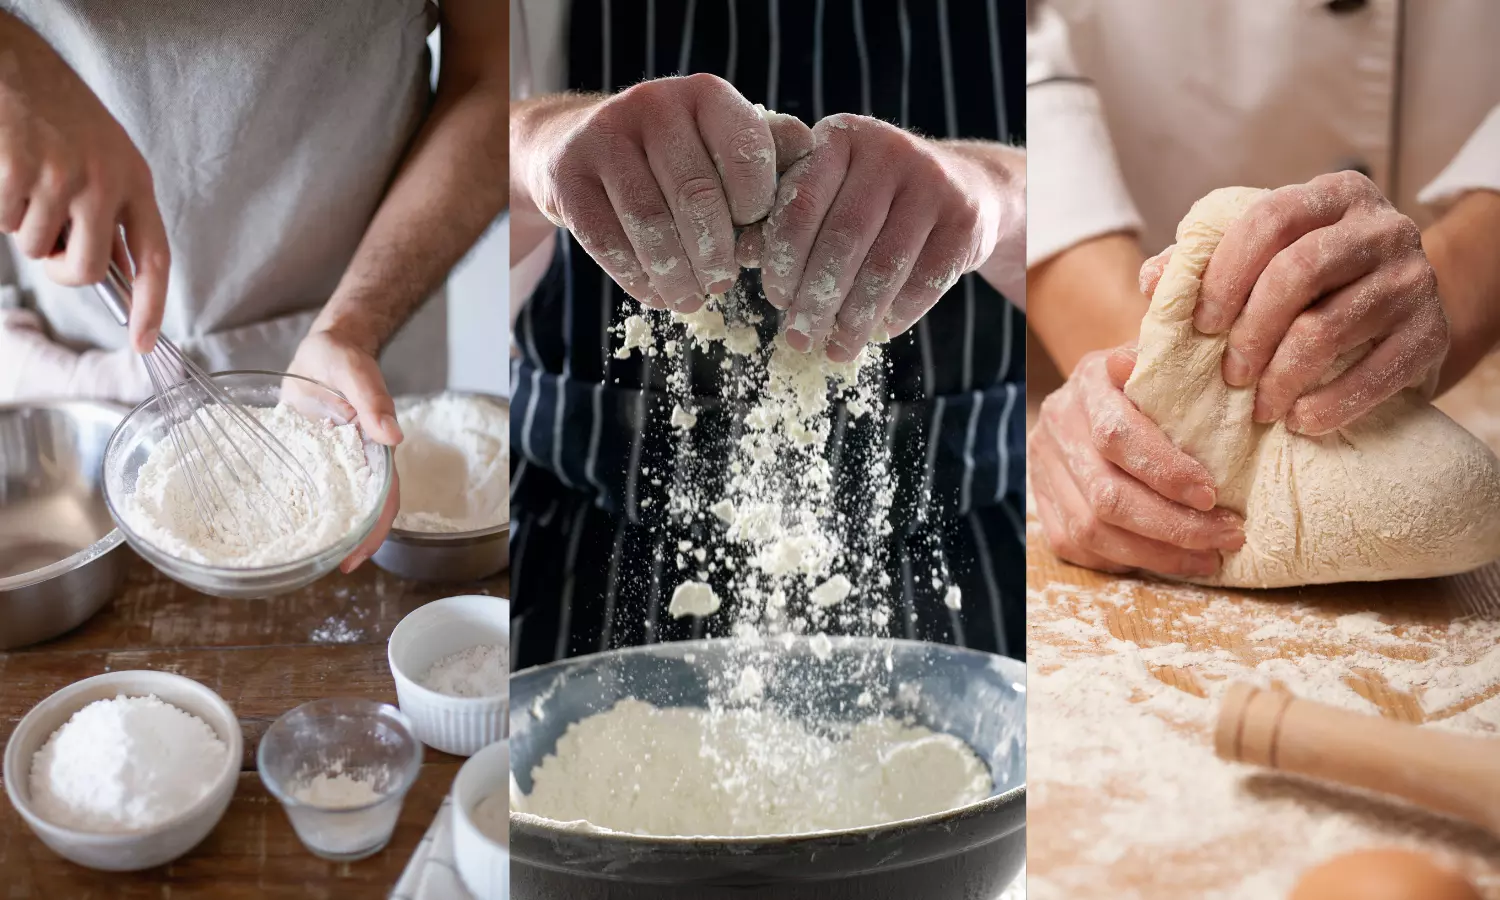 Baking 101: lingo you must know  to master the skill